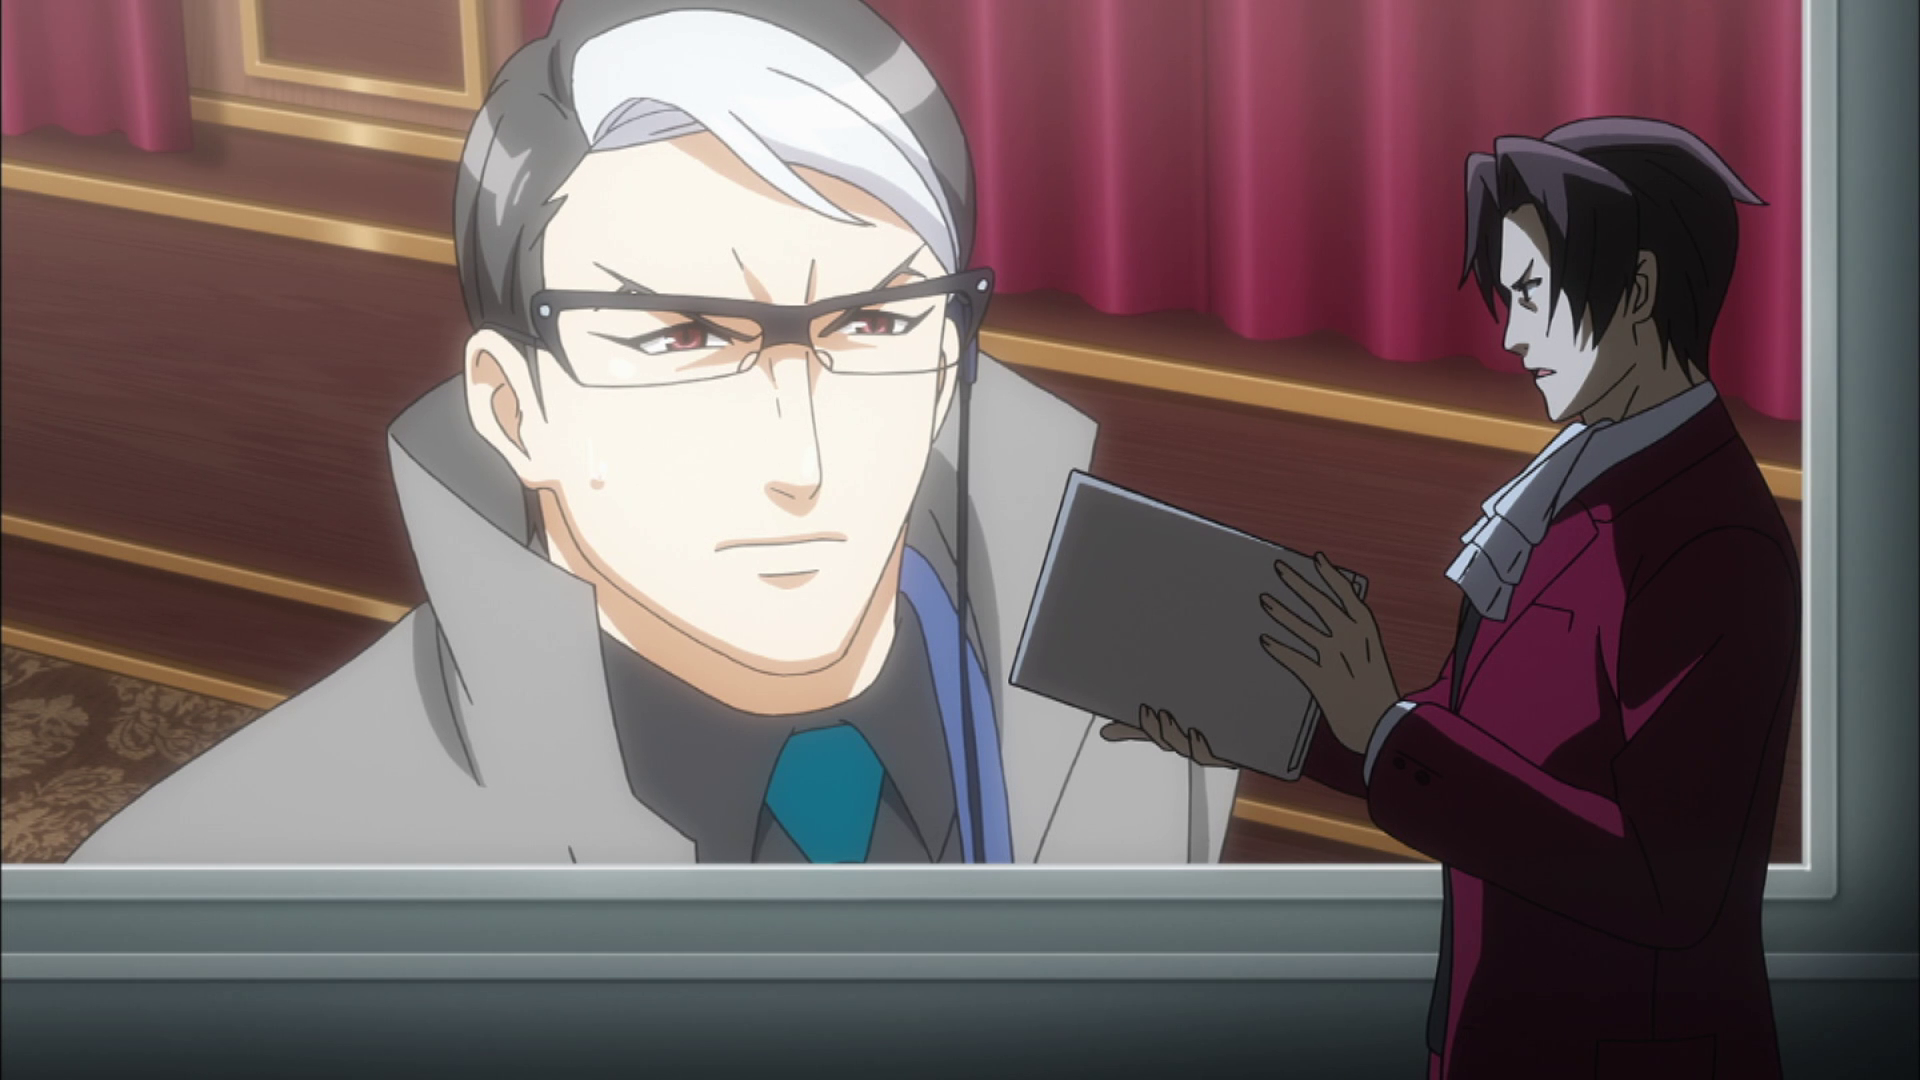 My Shiny Toy Robots: Anime REVIEW: Ace Attorney Season 2